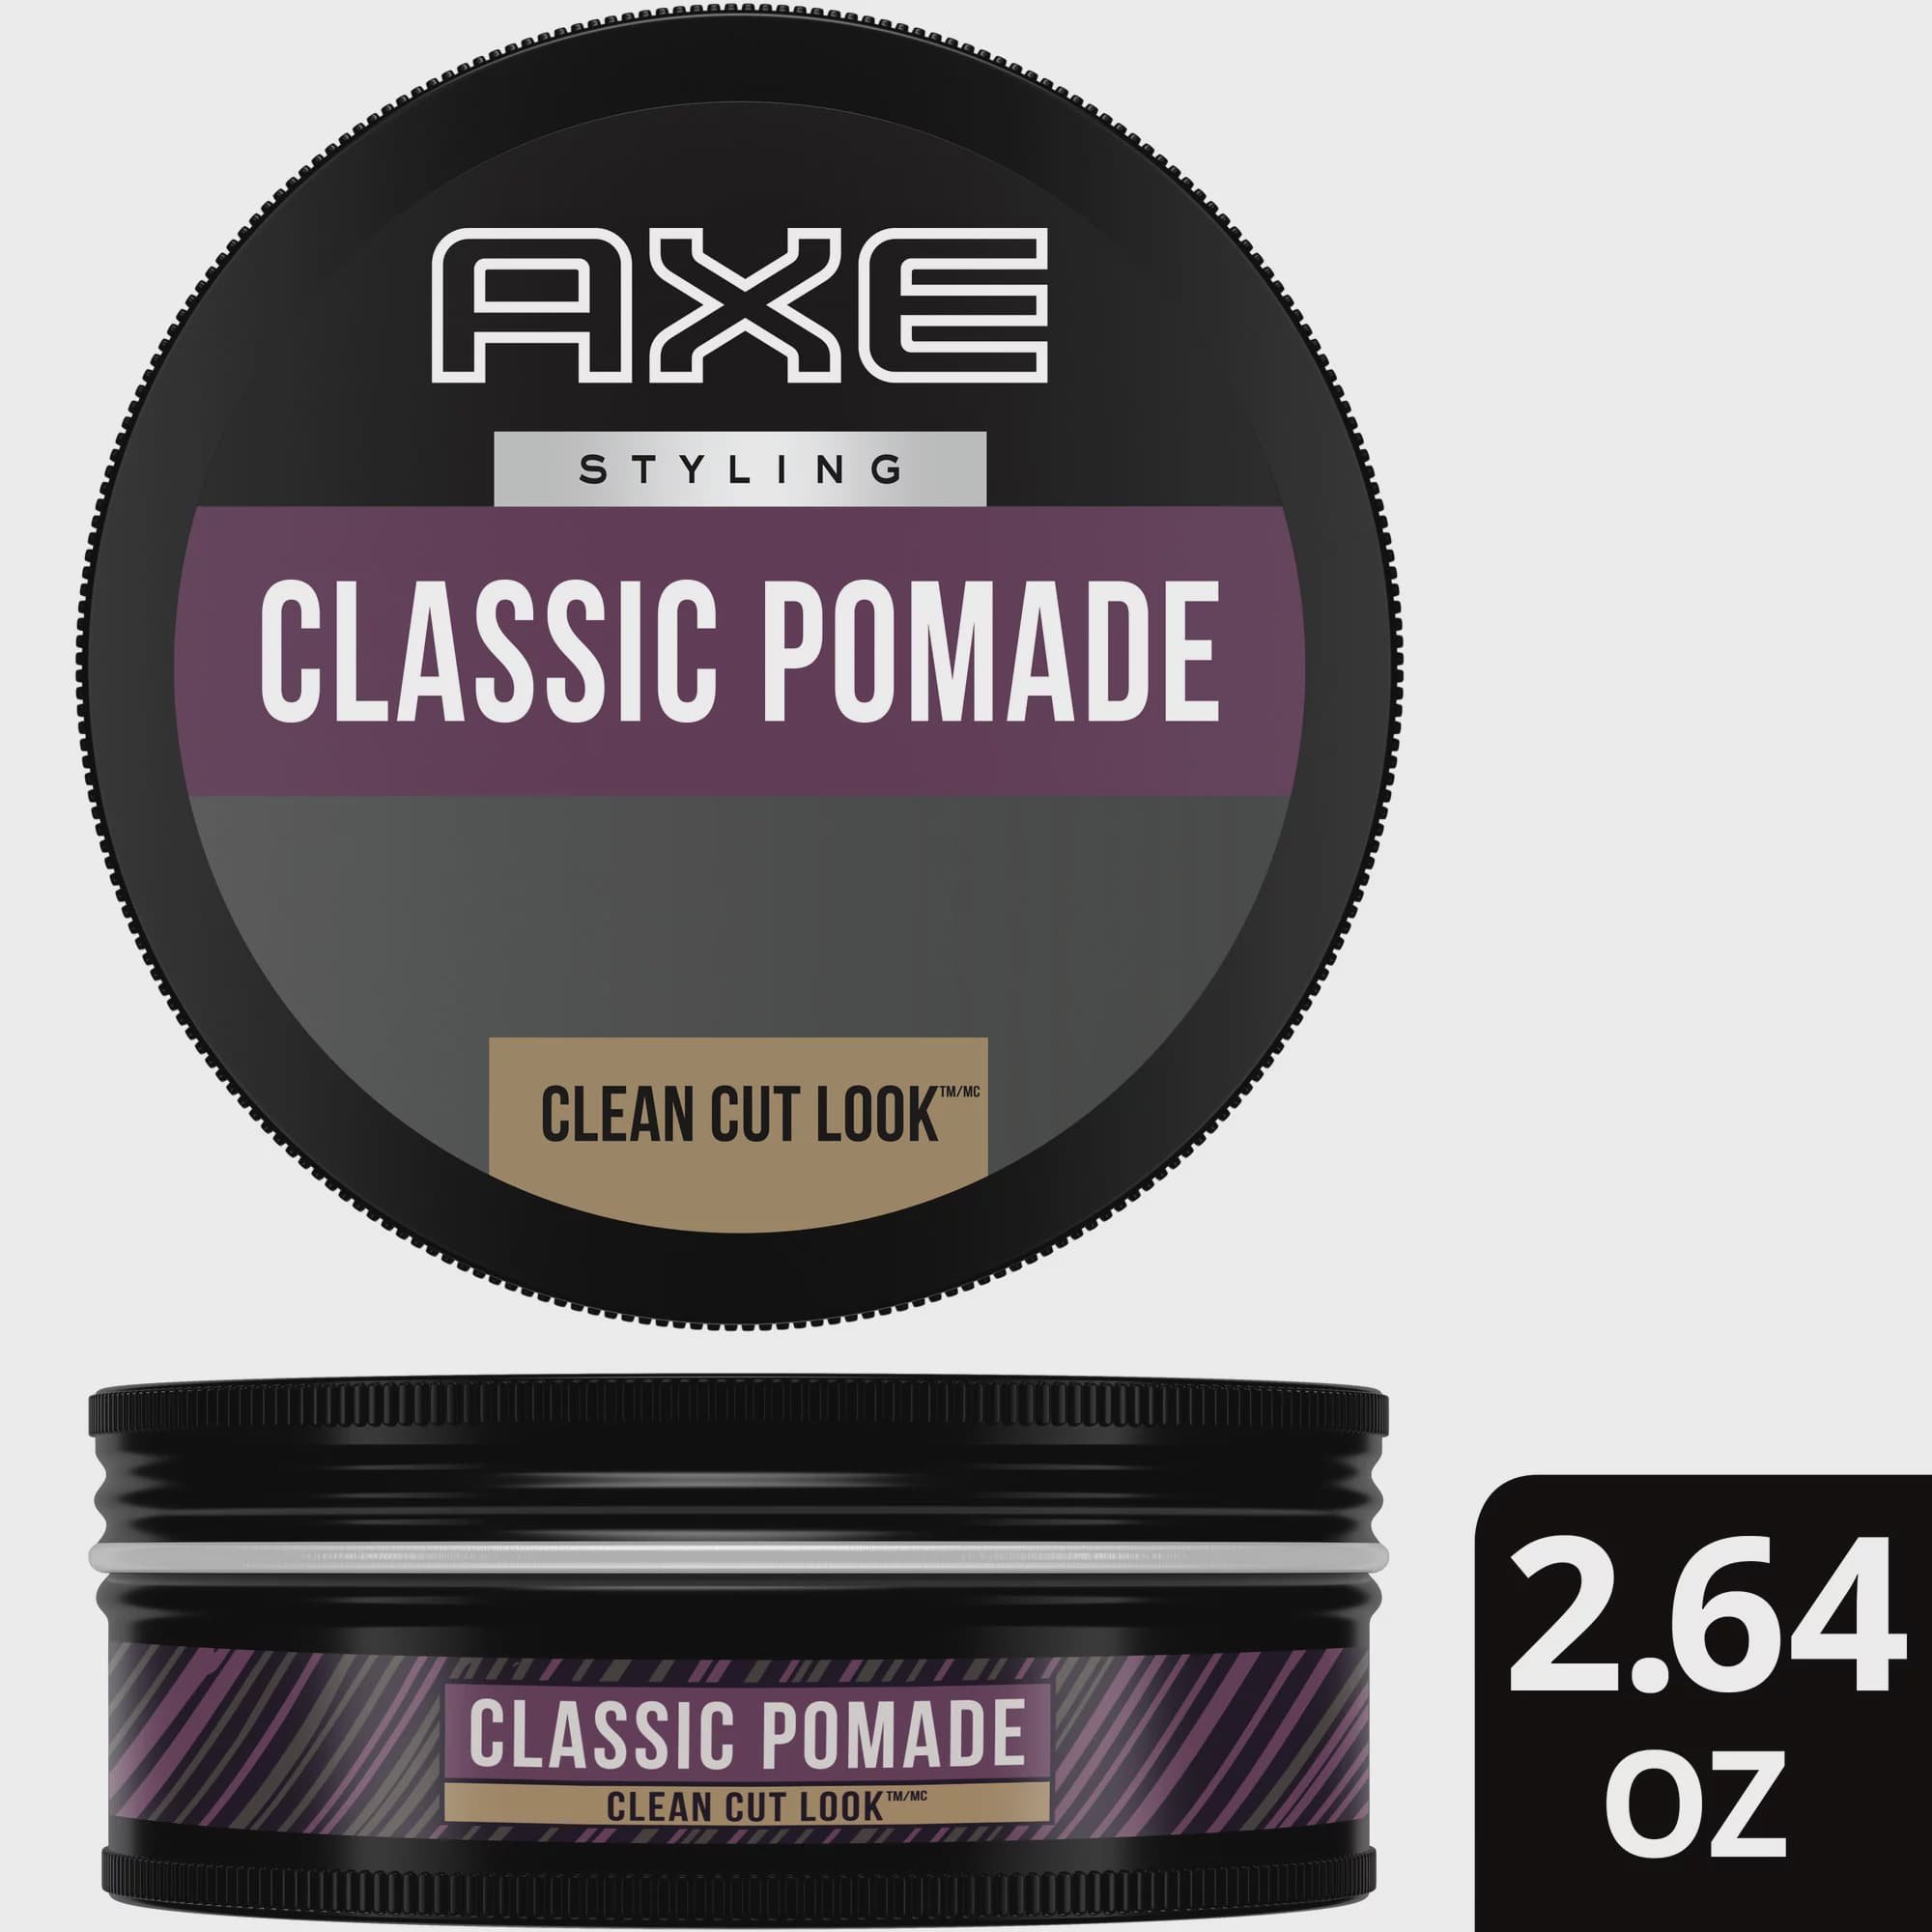 Axe Styling Clean Cut Look Classic Hair Pomade, 2.64 oz - image 2 of 7